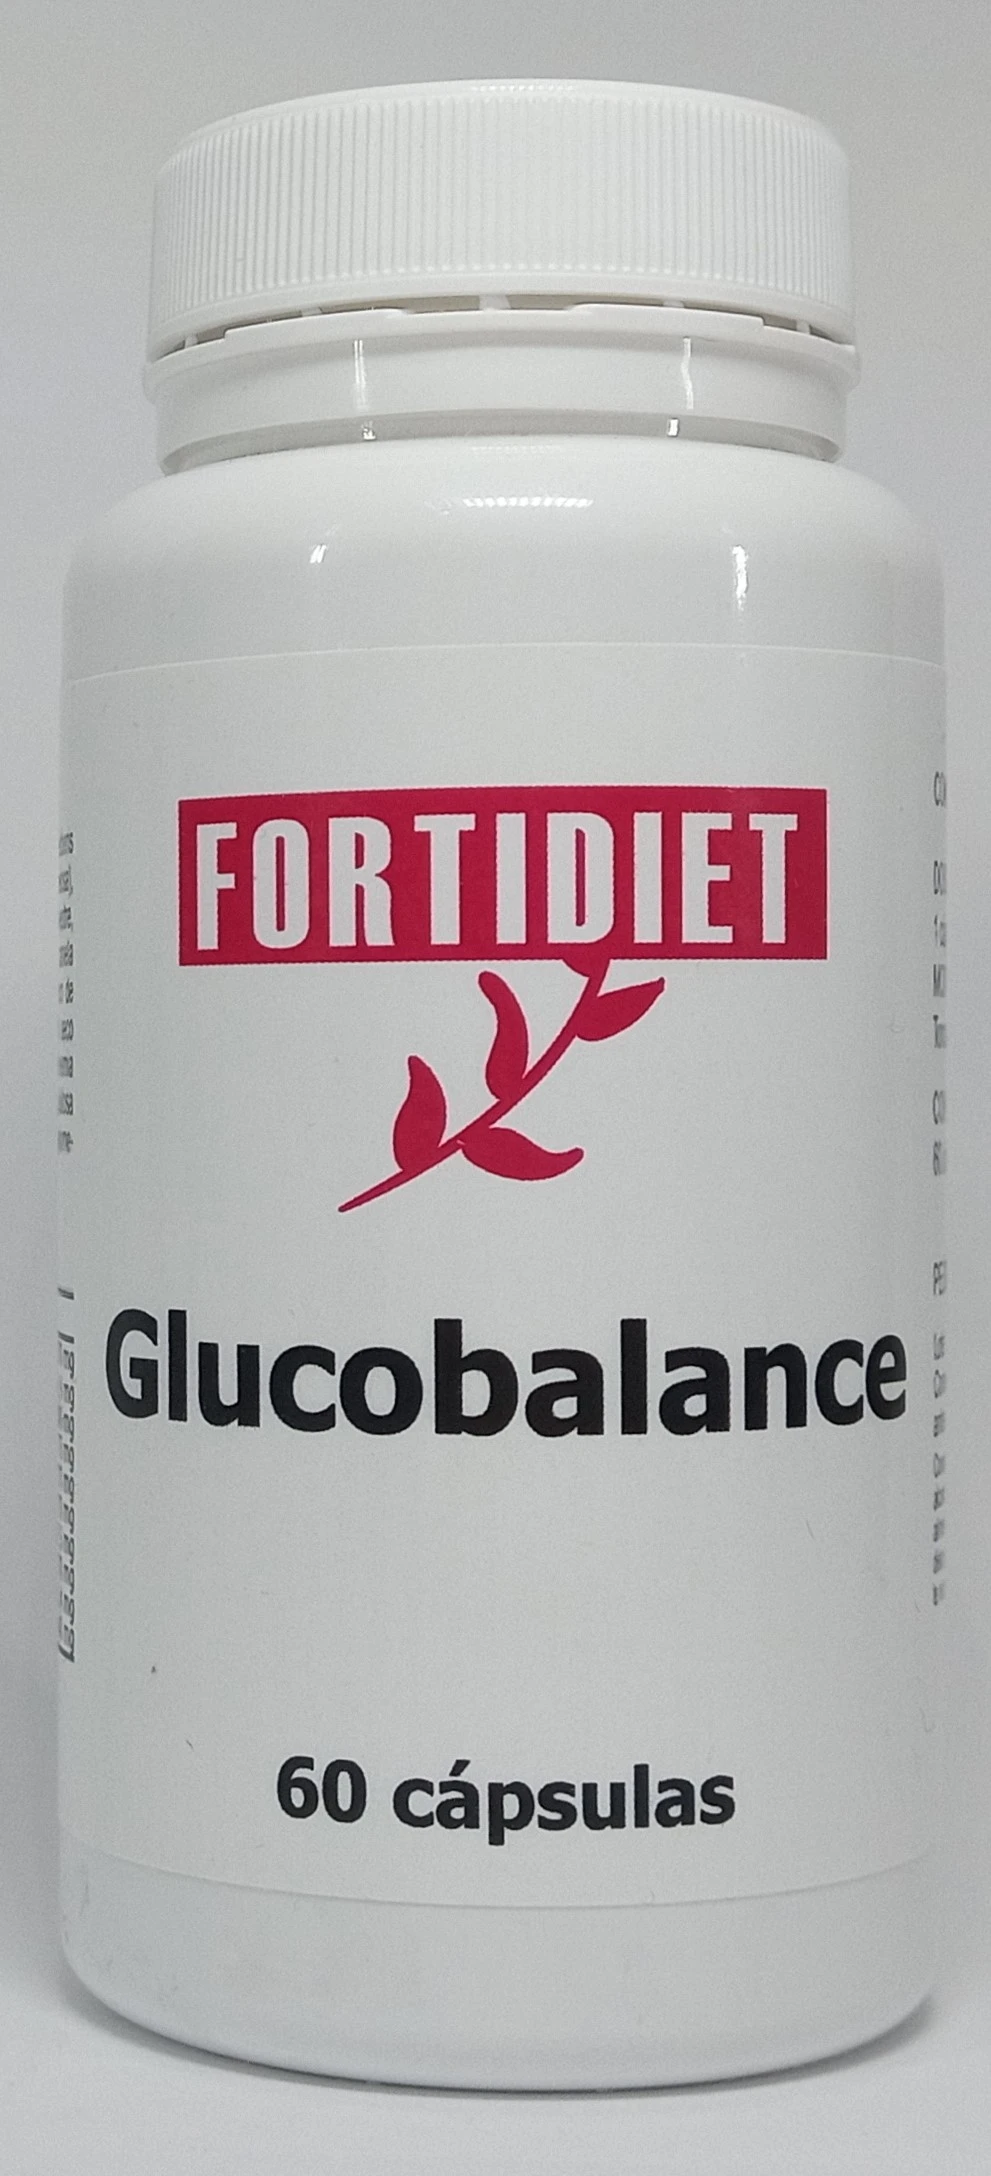 Fortidiet Glucobalance 60 caps.